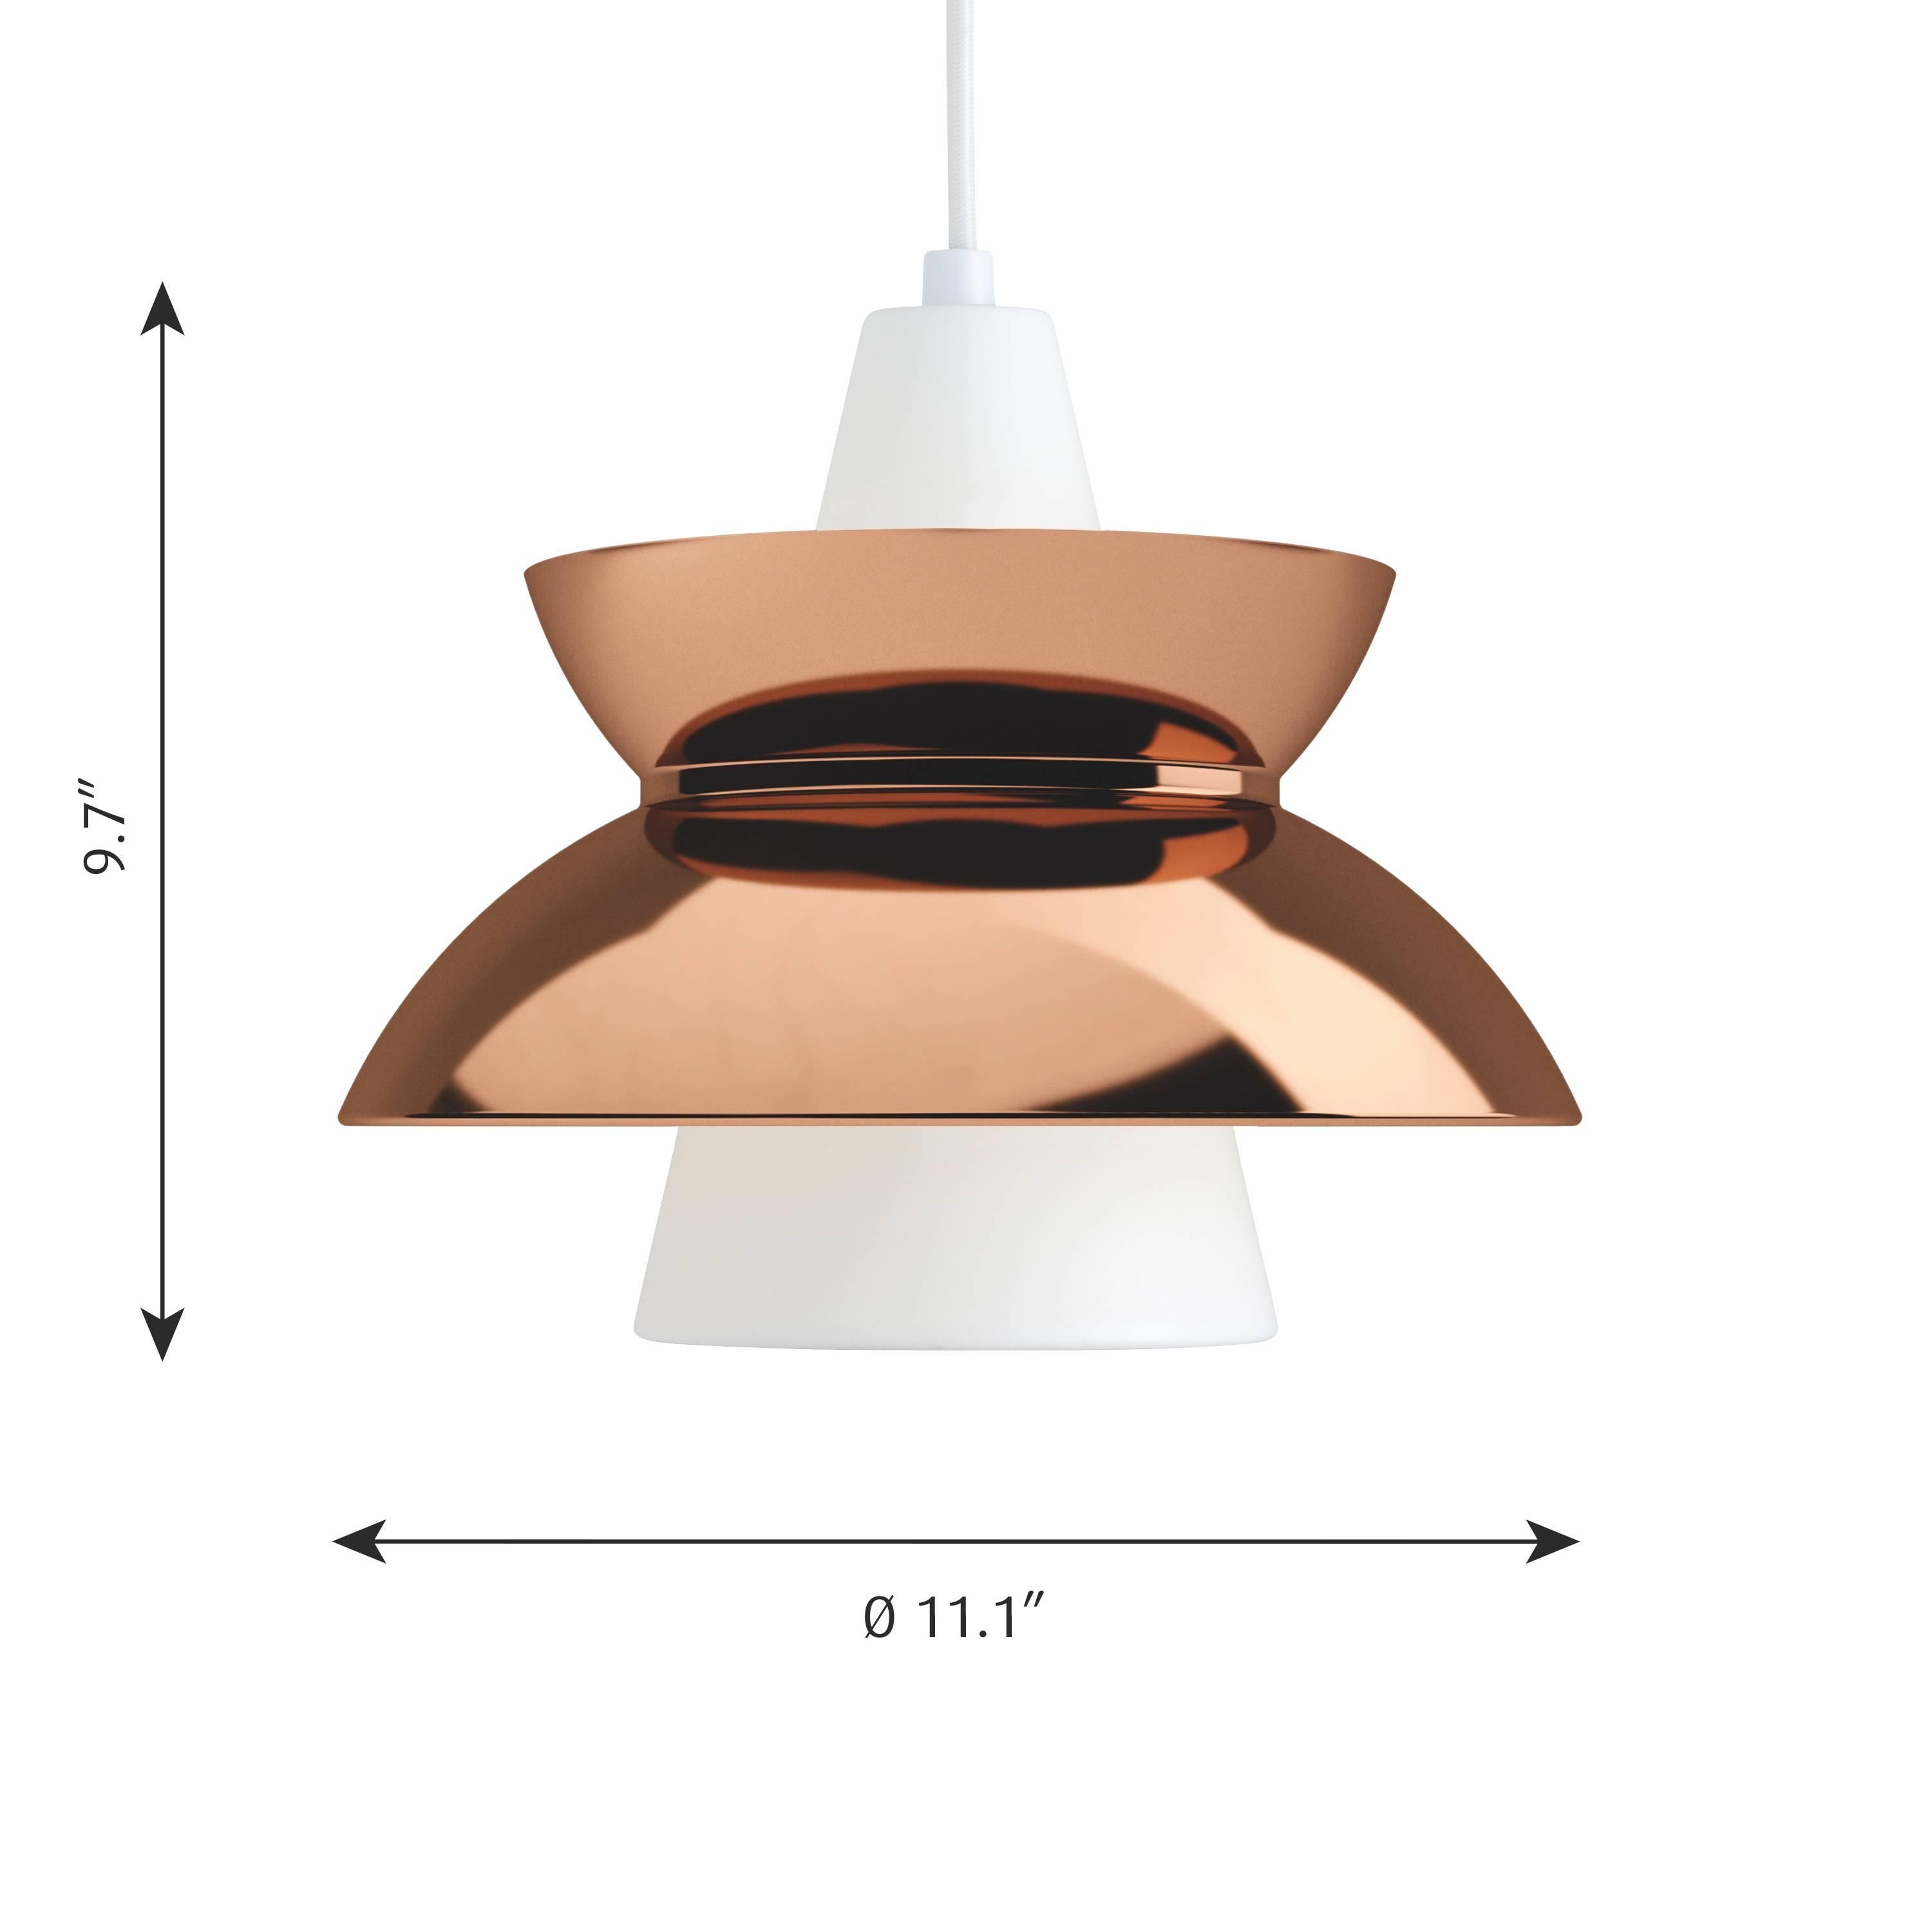 Jørn Utzon copper 'Doo-Wop' pendants for Louis Poulsen. Originally designed in the 1950s and re-editioned in the 2010s. Available in stainless steel, copper, brass and aluminum versions in white and dark gray. Also available in LED version.

Price